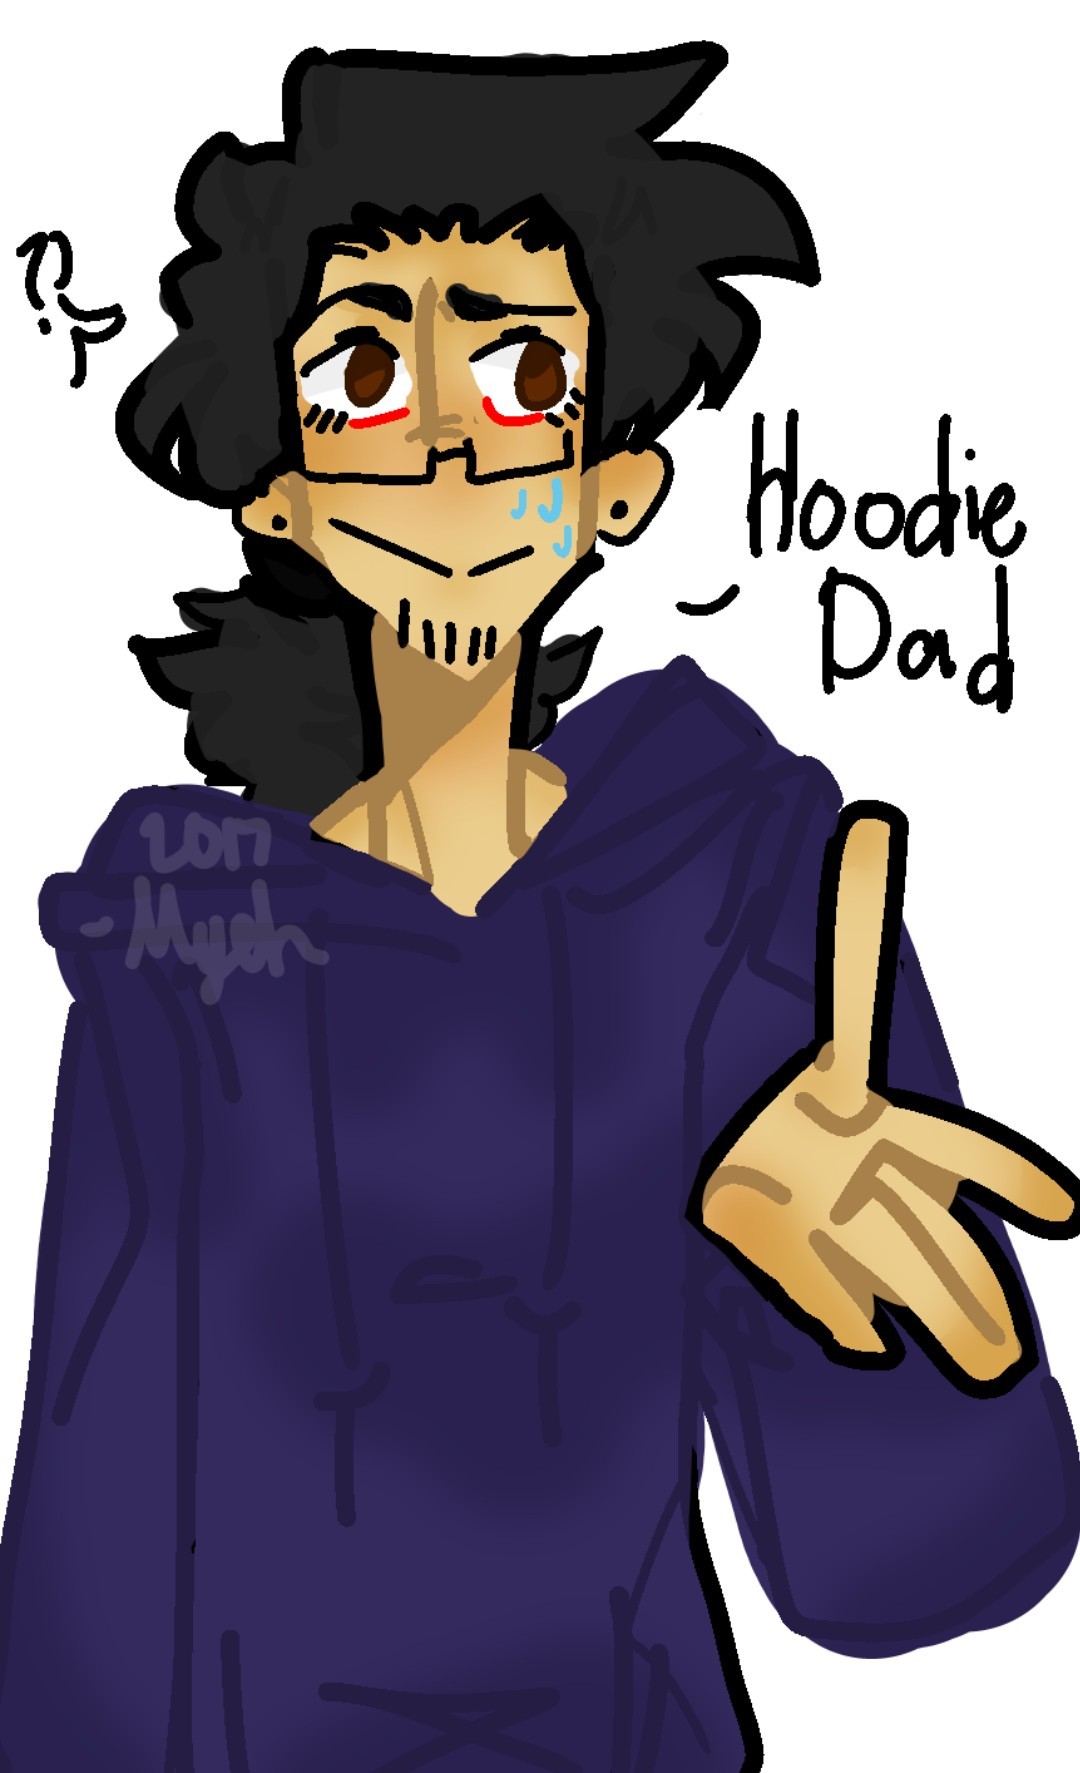 *anyways, if anyone knows the game called dream daddy then. you'll get why I did this


*dadsona or something-